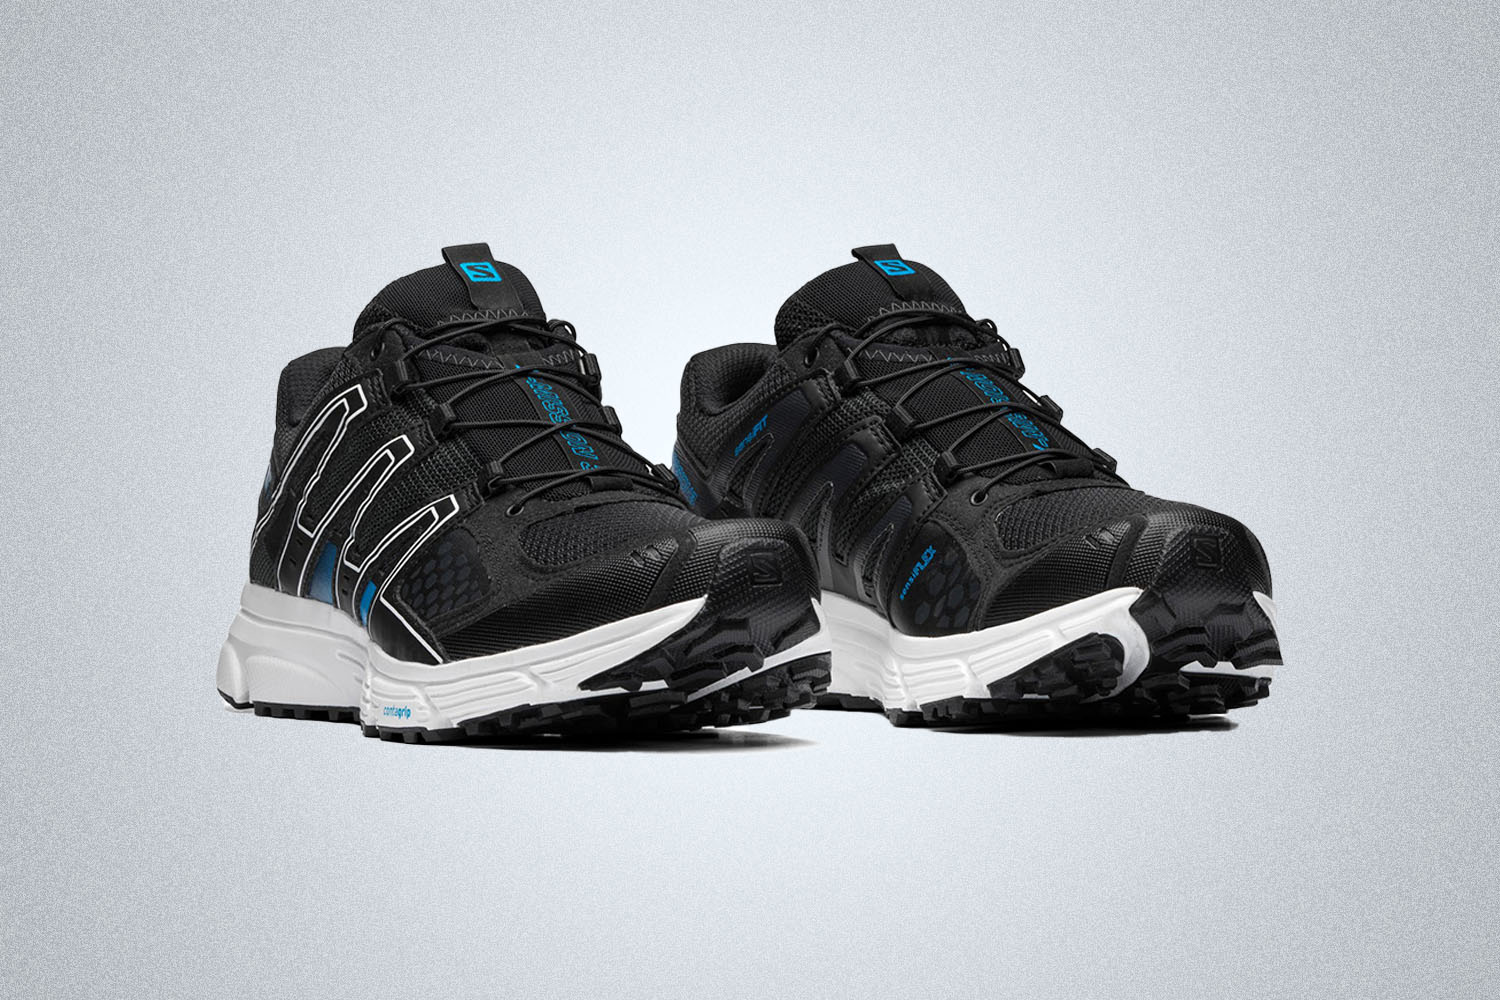 a pair of black Salomon hiking sneakers with white soles and blue accents on a grey background